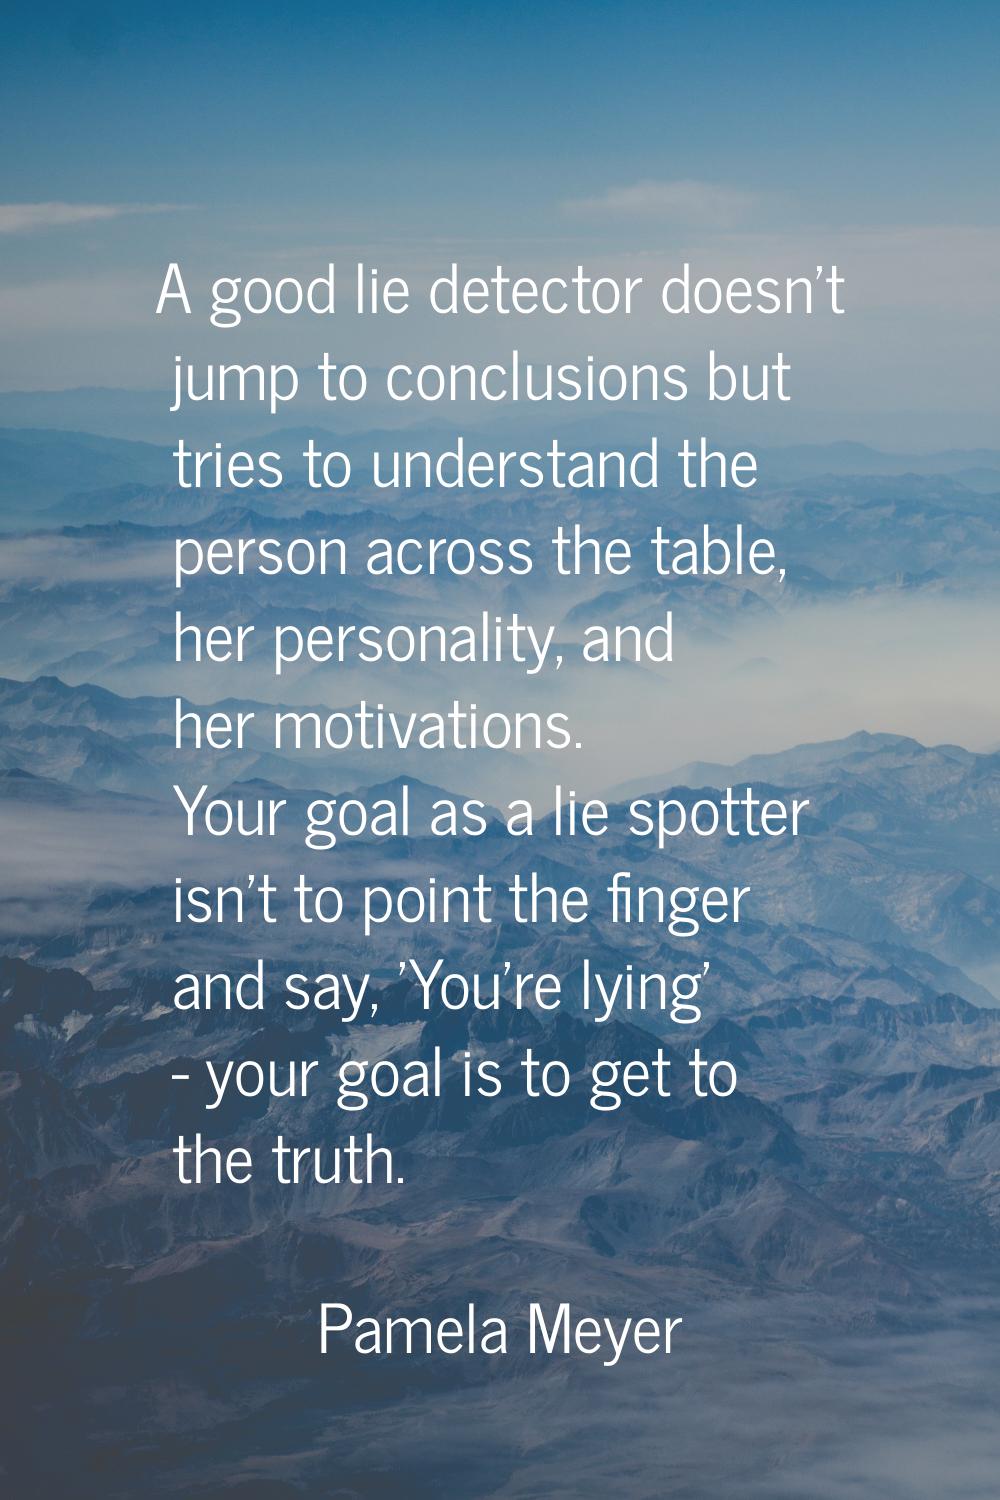 A good lie detector doesn't jump to conclusions but tries to understand the person across the table